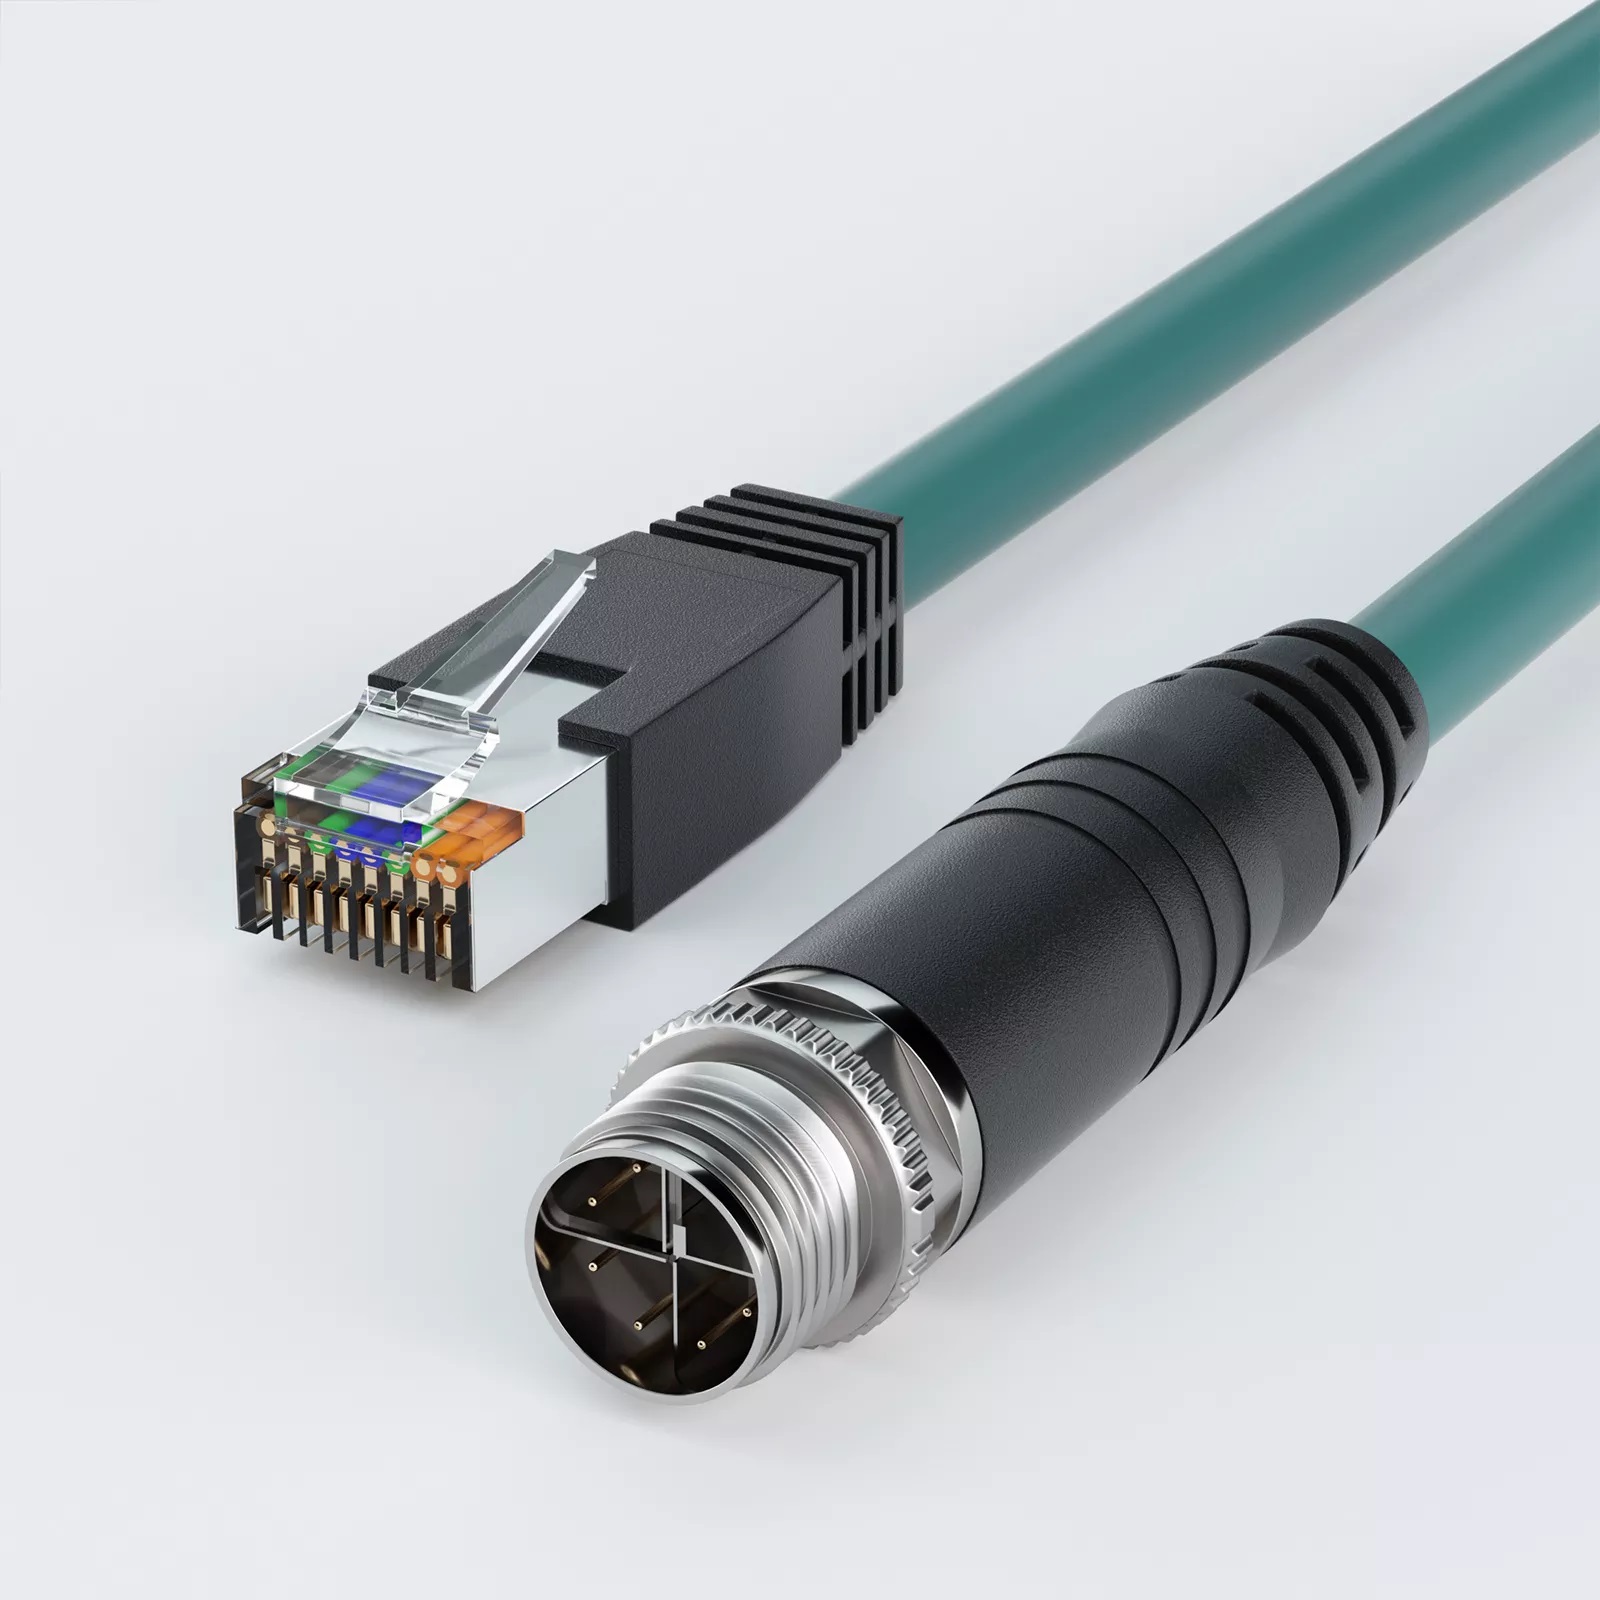 M12 x-code to RJ45 GigE cable